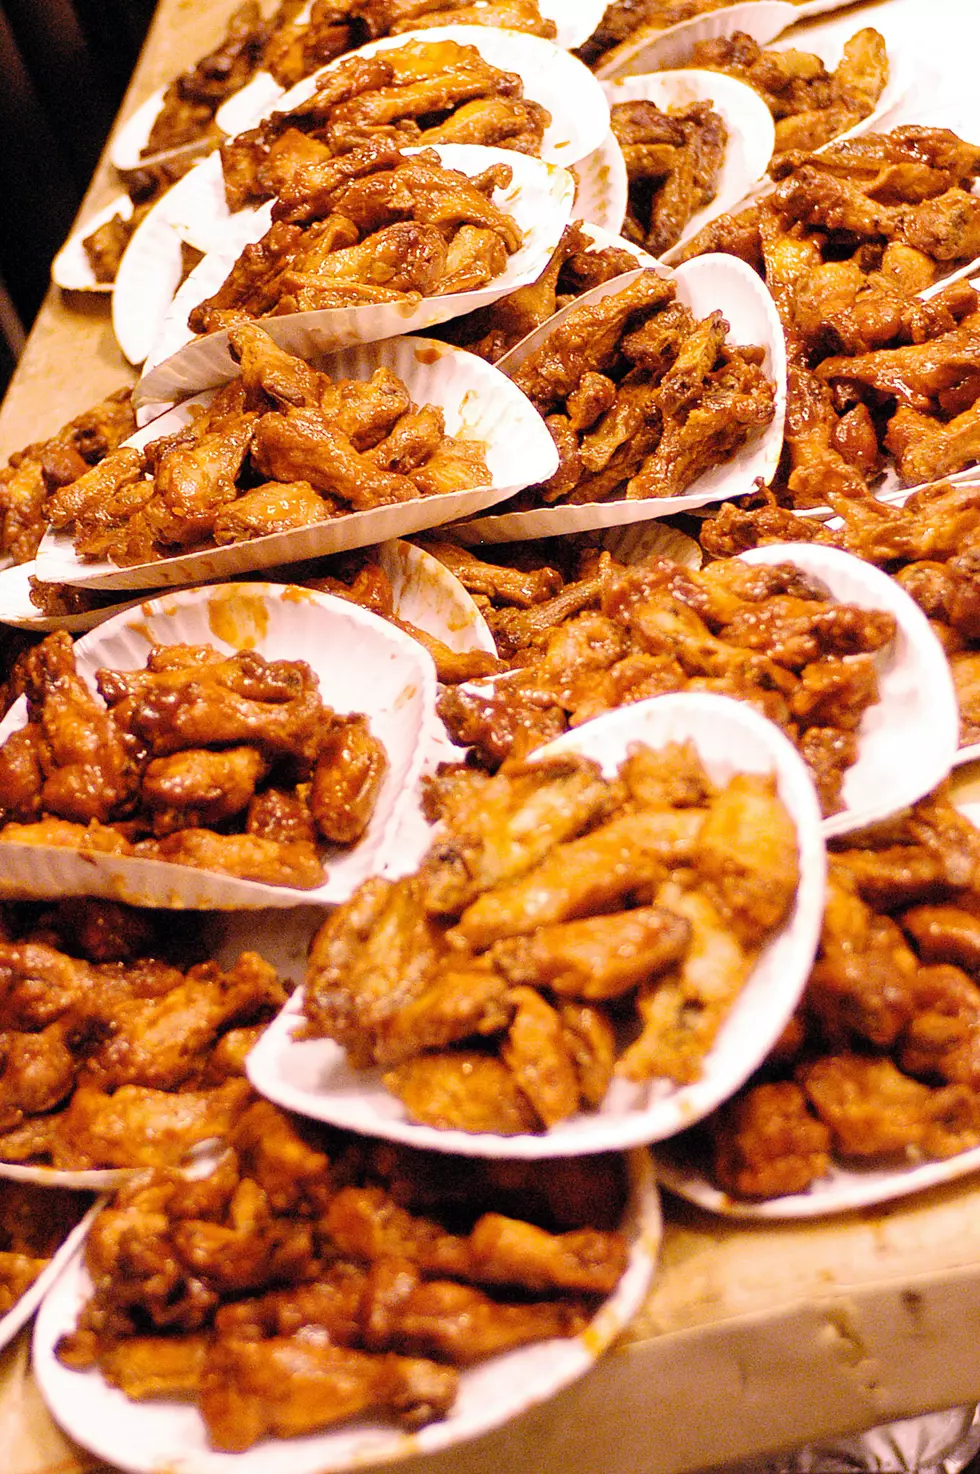 I-95’s CT Wing Fest Looking for Judges